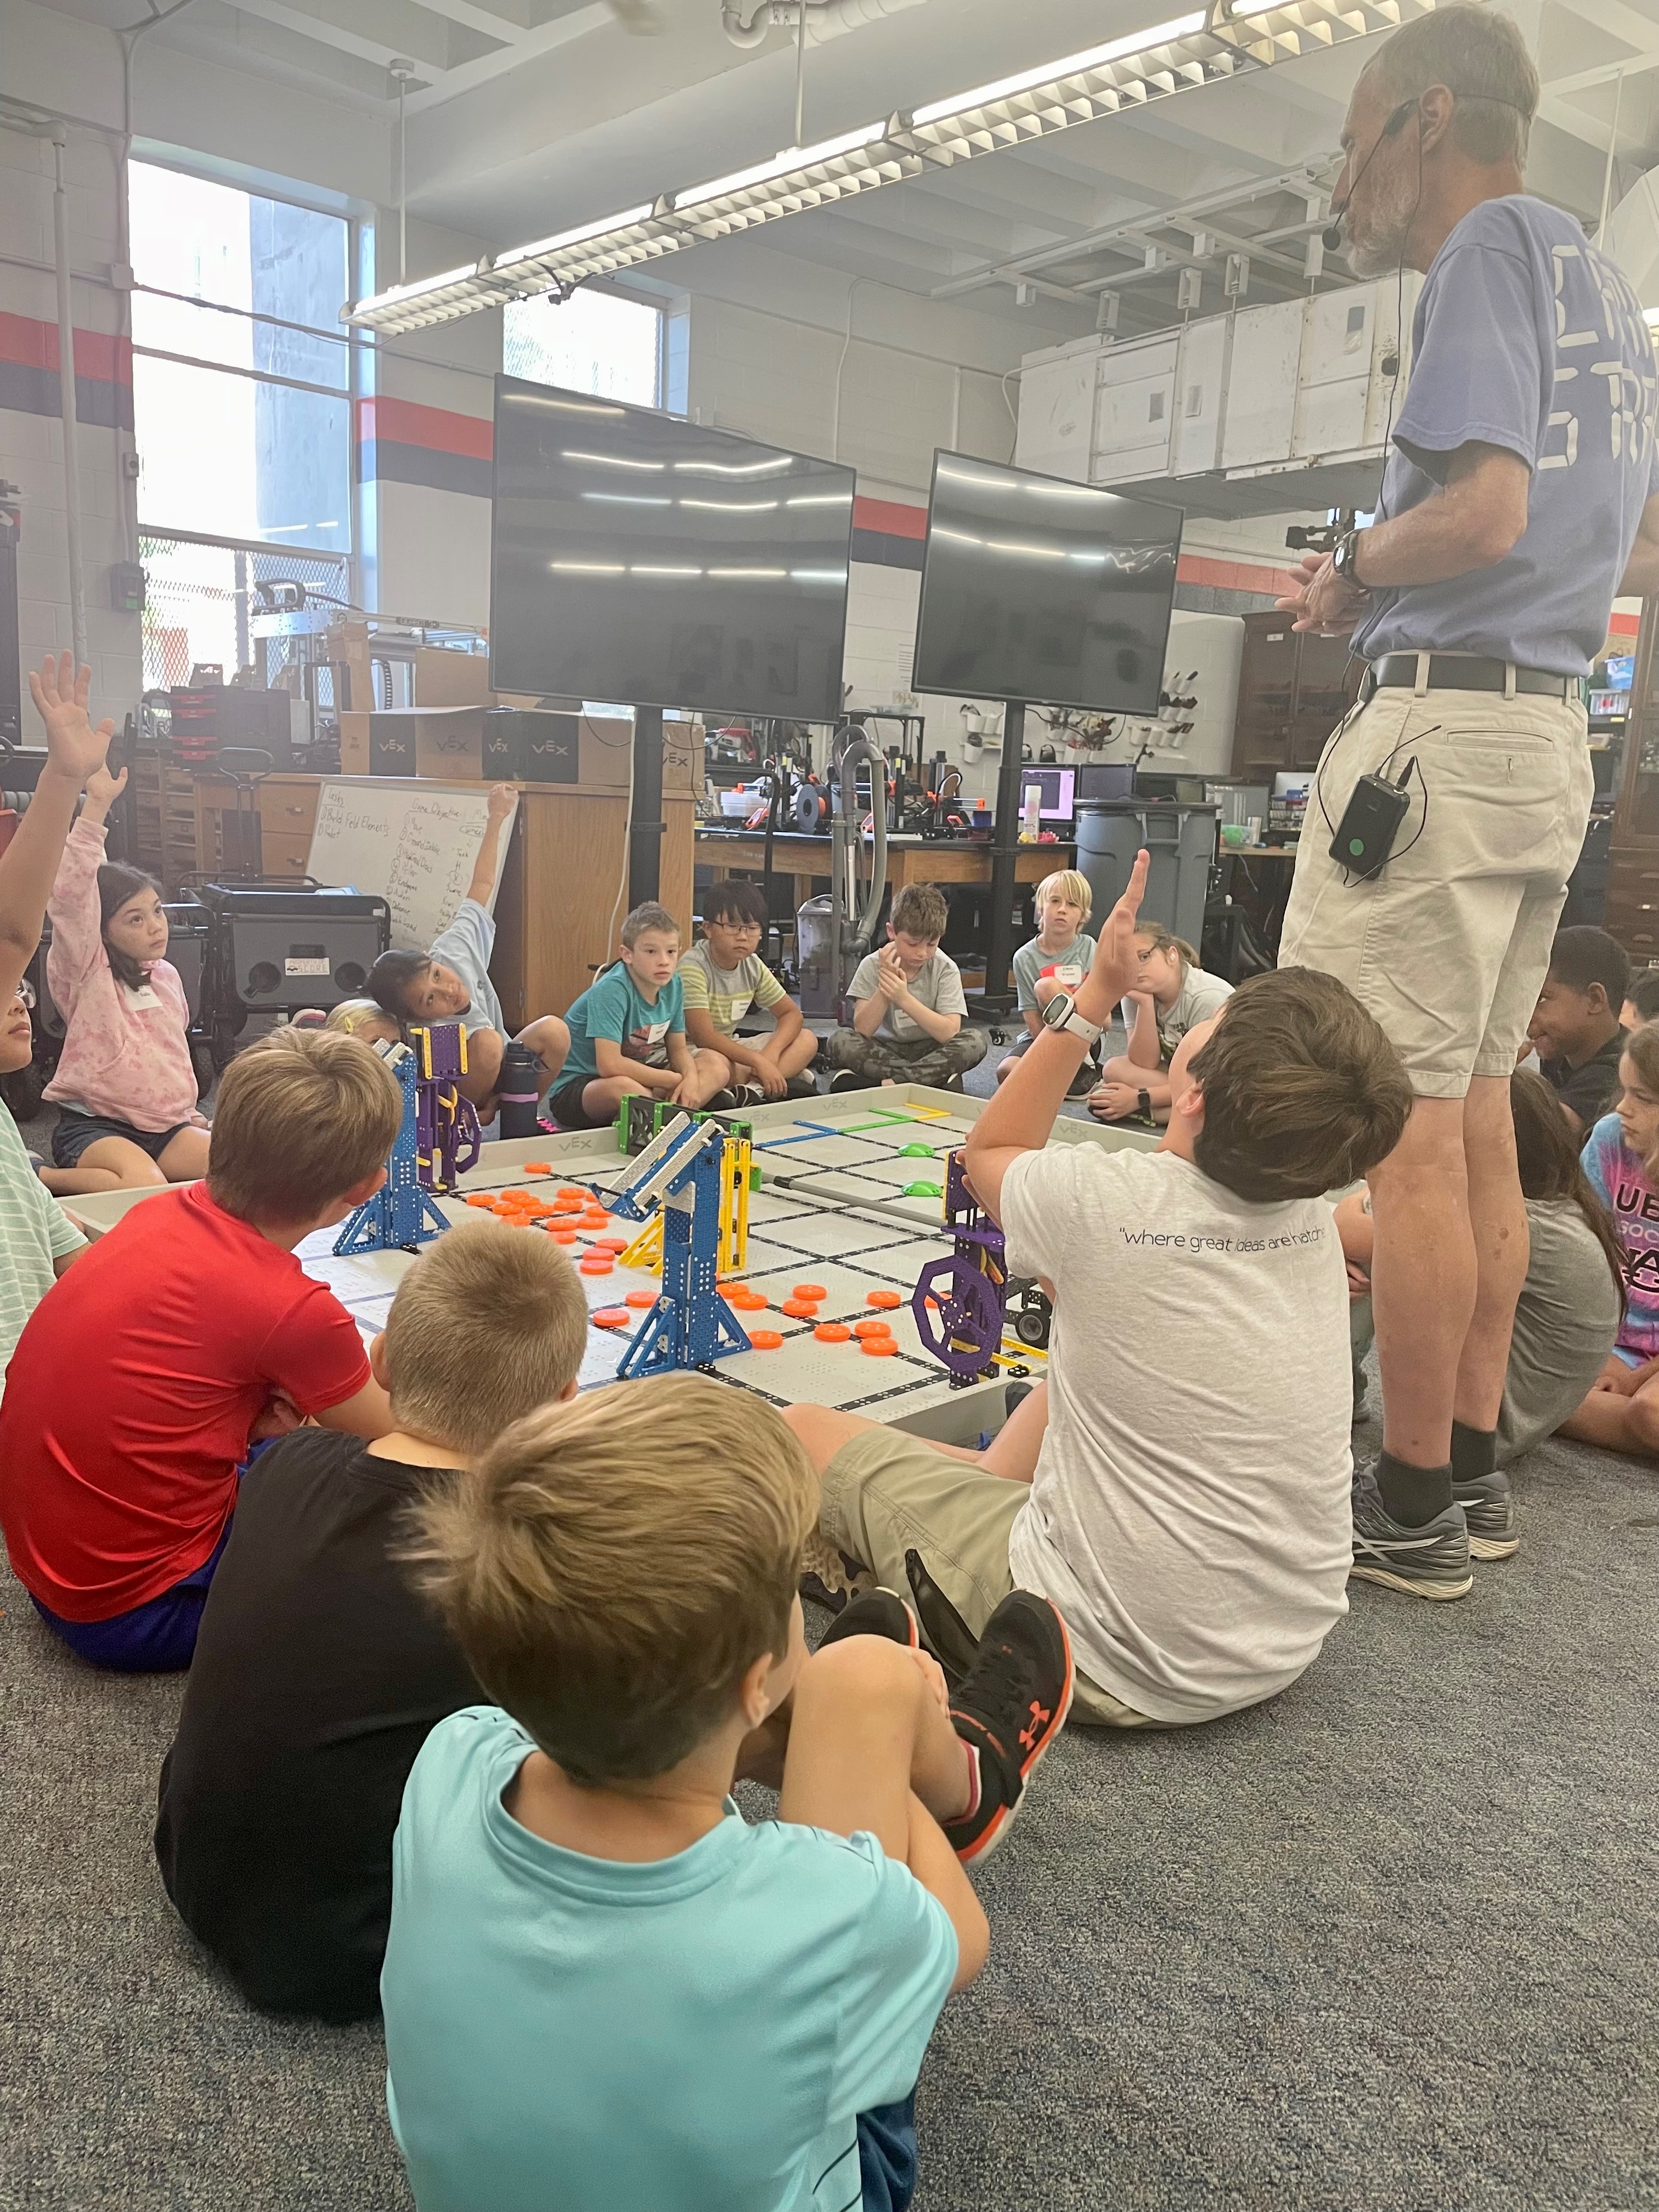 VEX IQ campers share ideas with Dr. Zutter on how to improve their robot for competition.